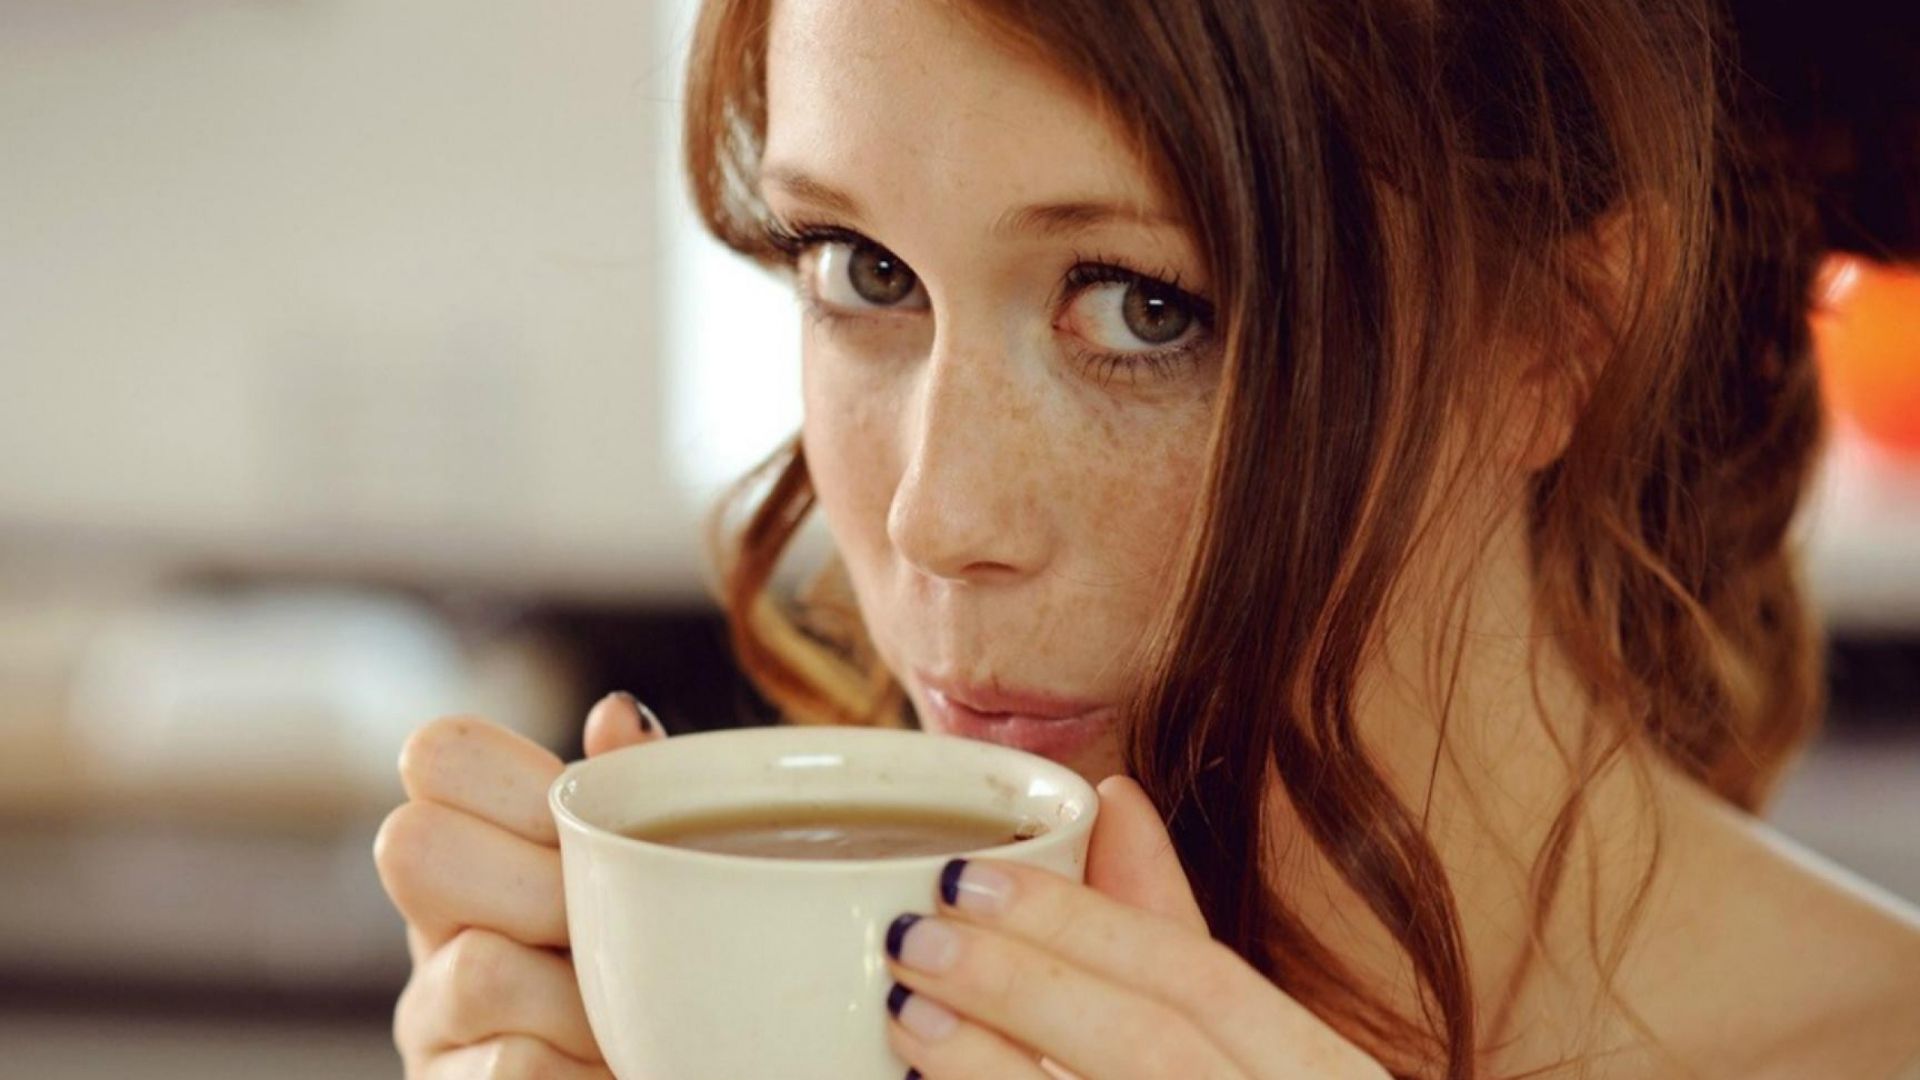 Girl with freckles drinking coffee Desktop wallpaper 1920x1080